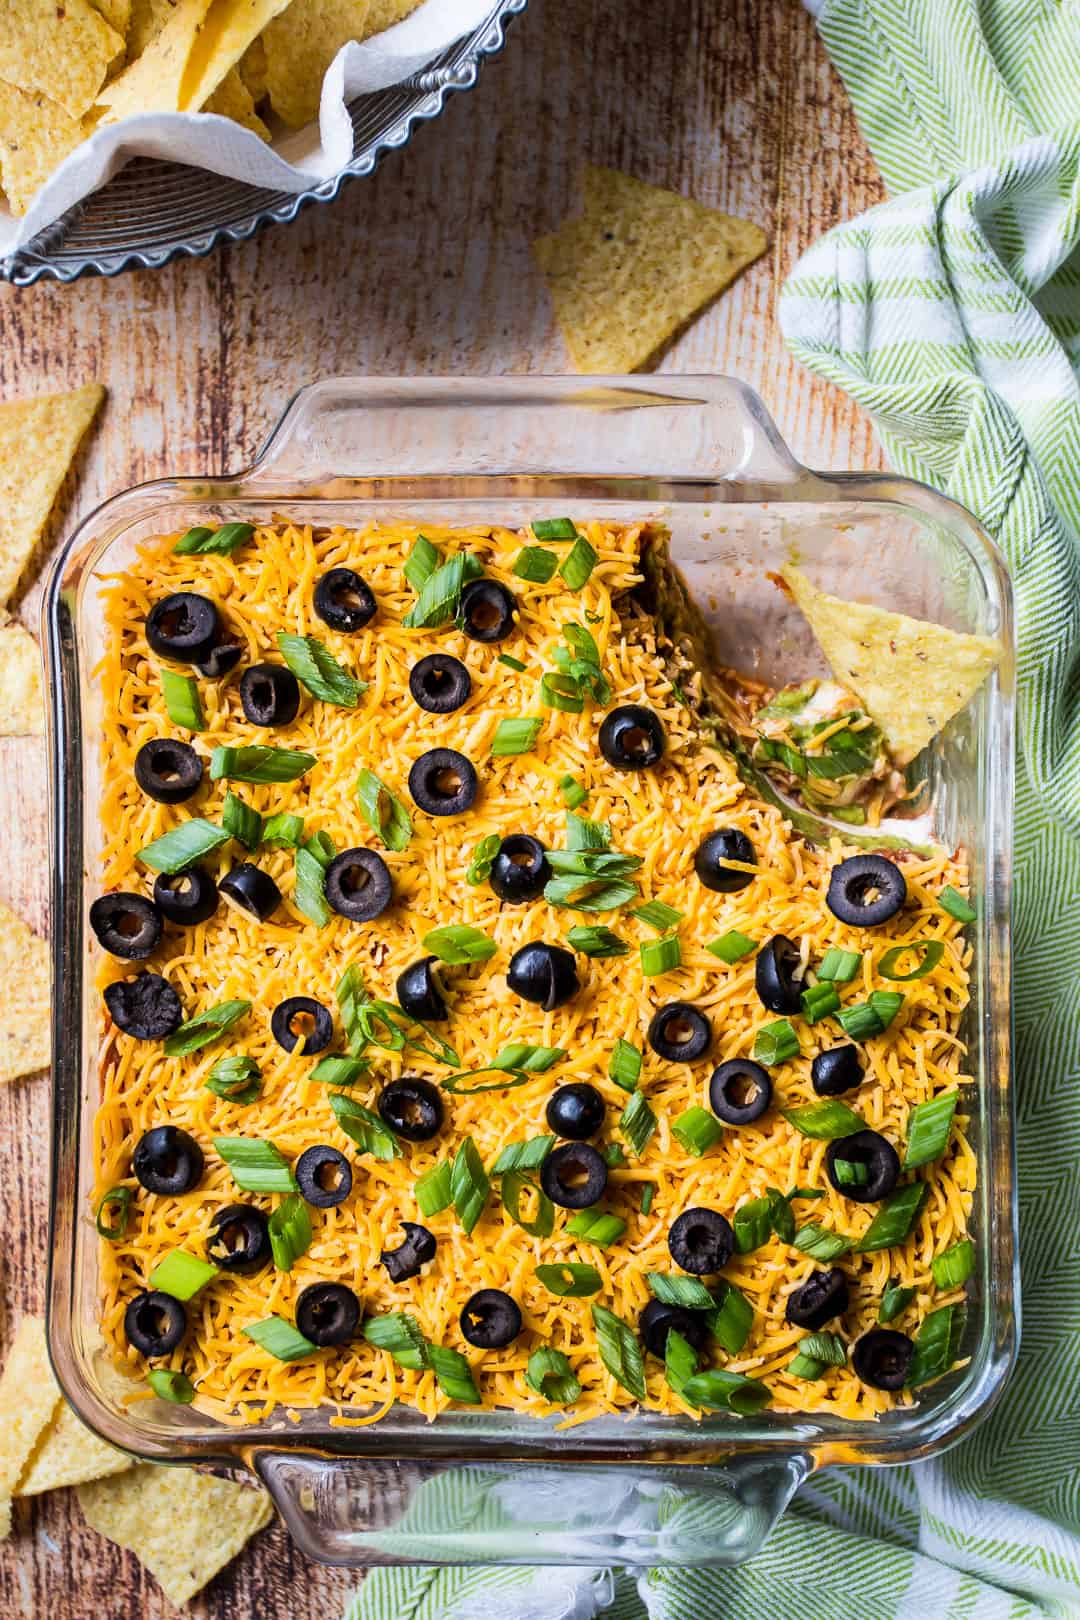 Overhead image of 7-layer dip recipe, with a basket of corn chips and a green kitchen towel.